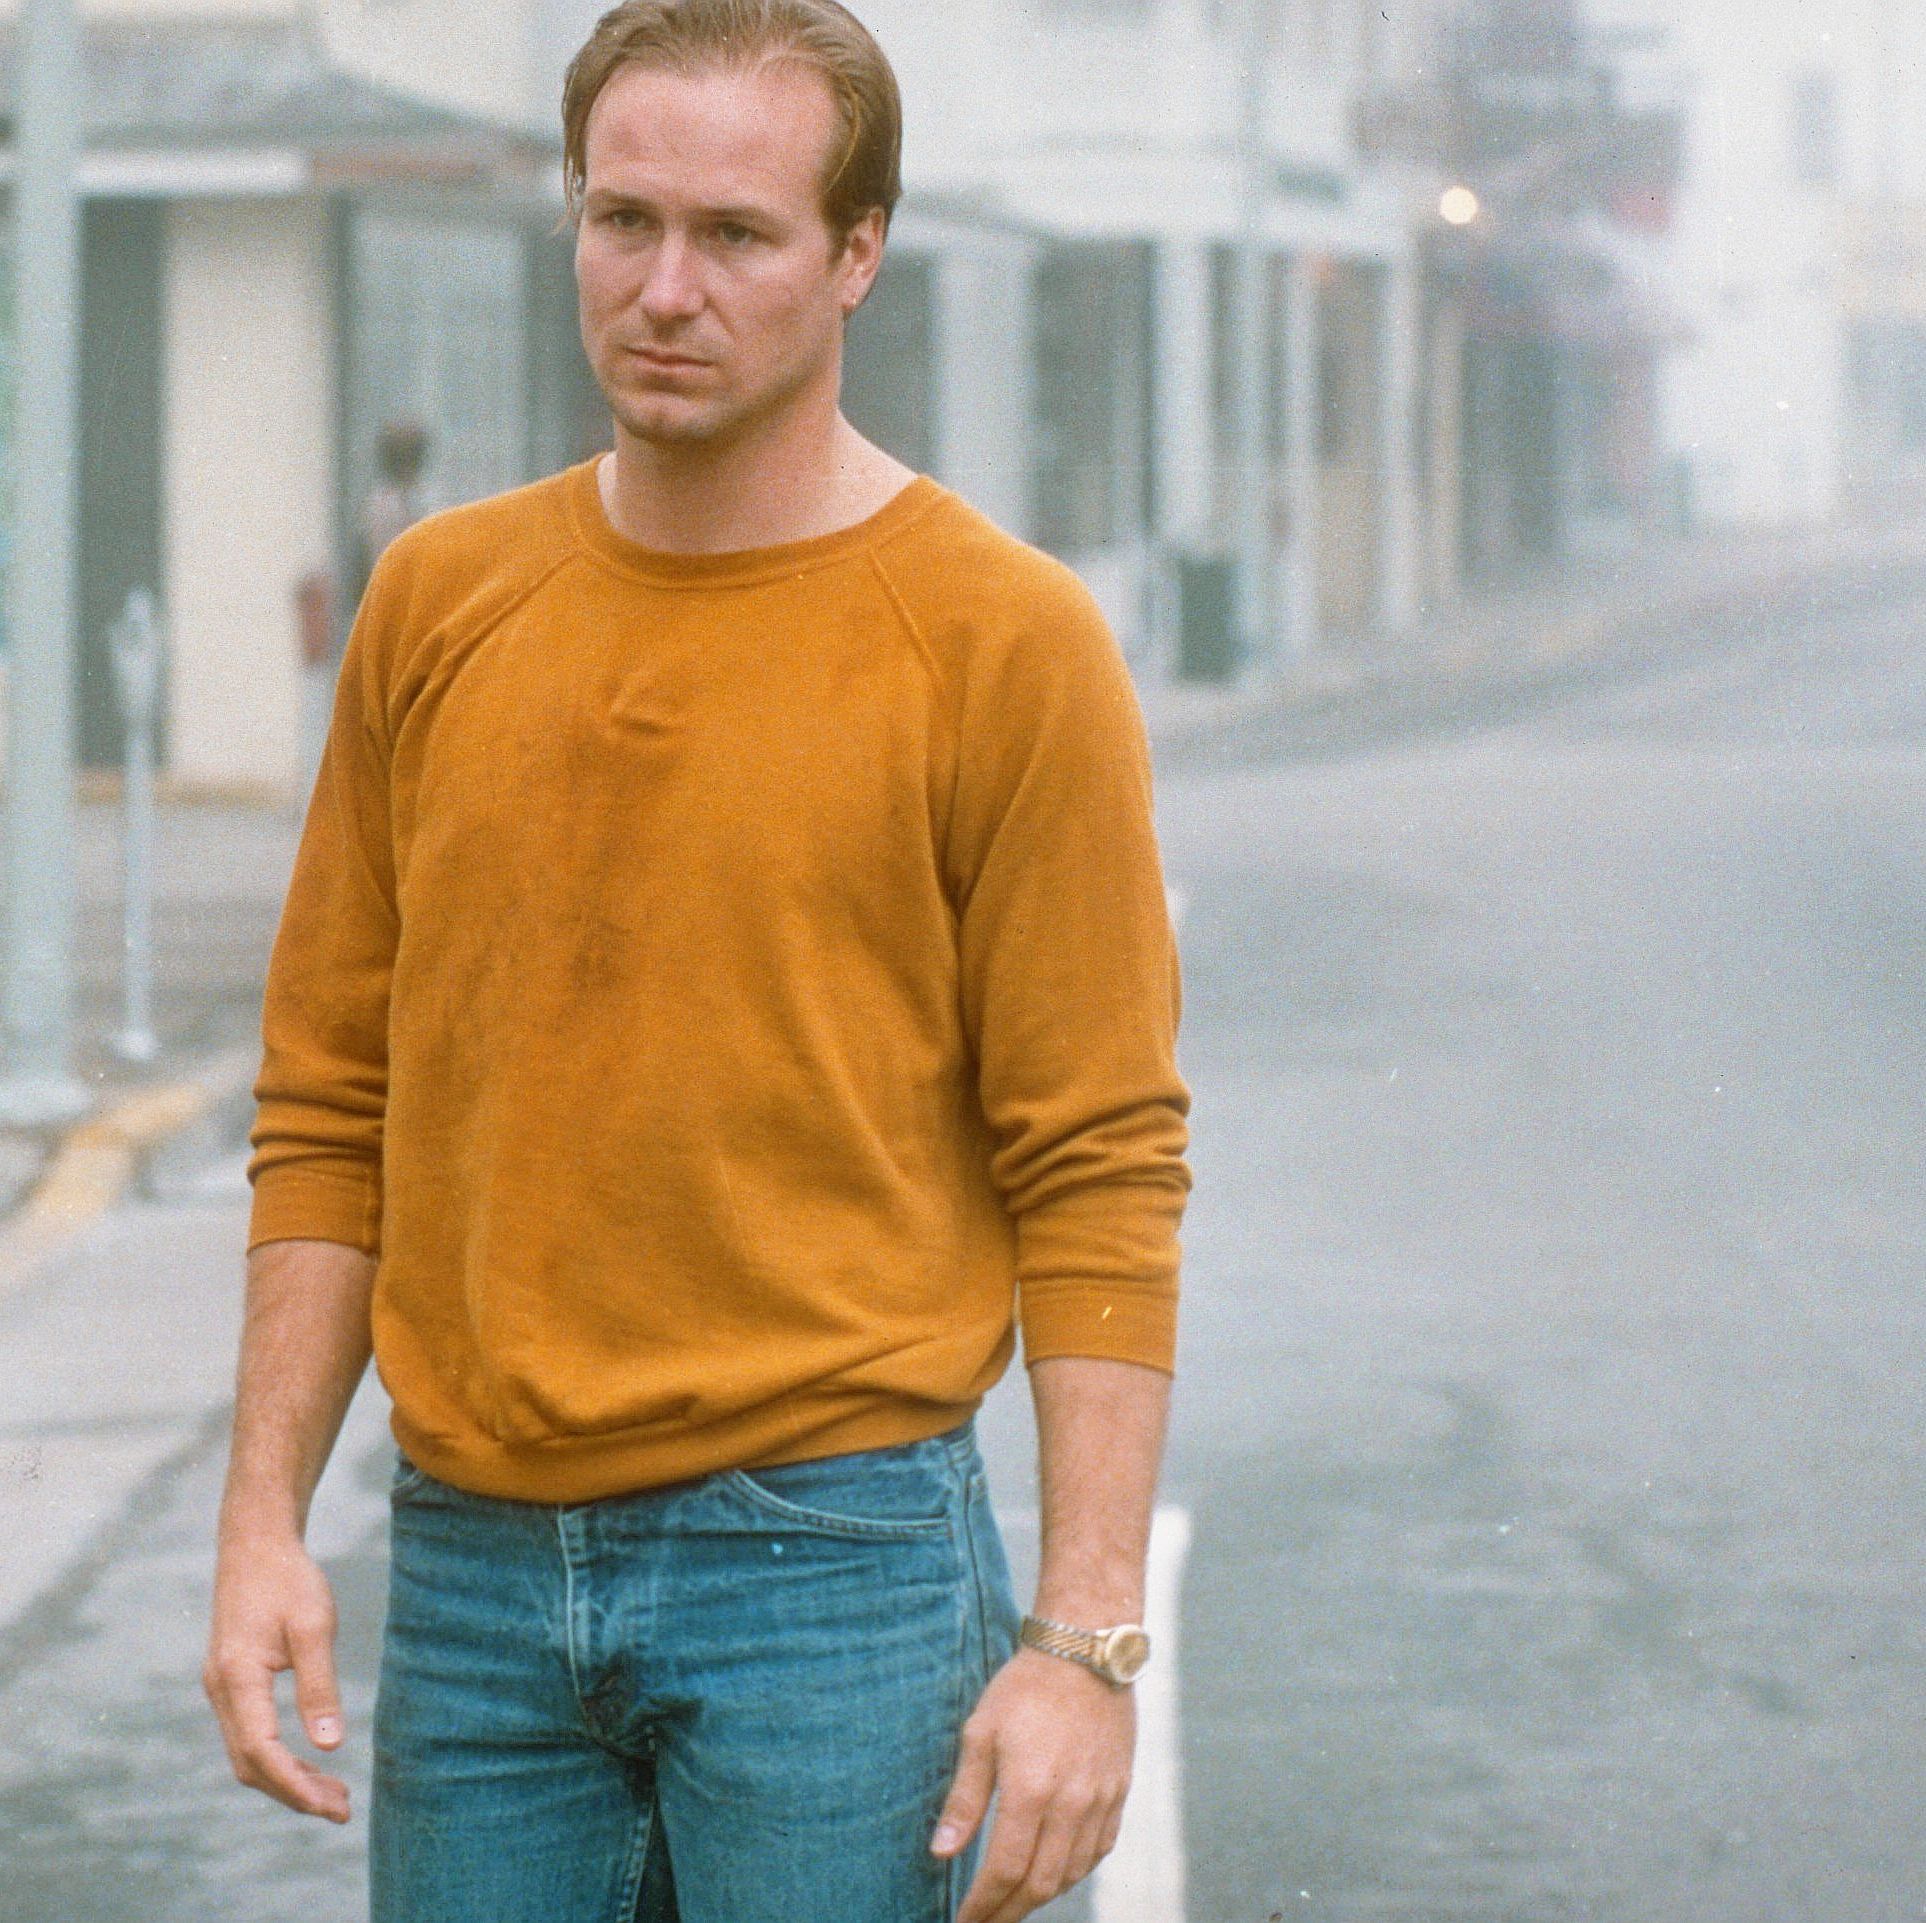 William Hurt Was a Weird, Sensitive, Complicated Guy in the '80s